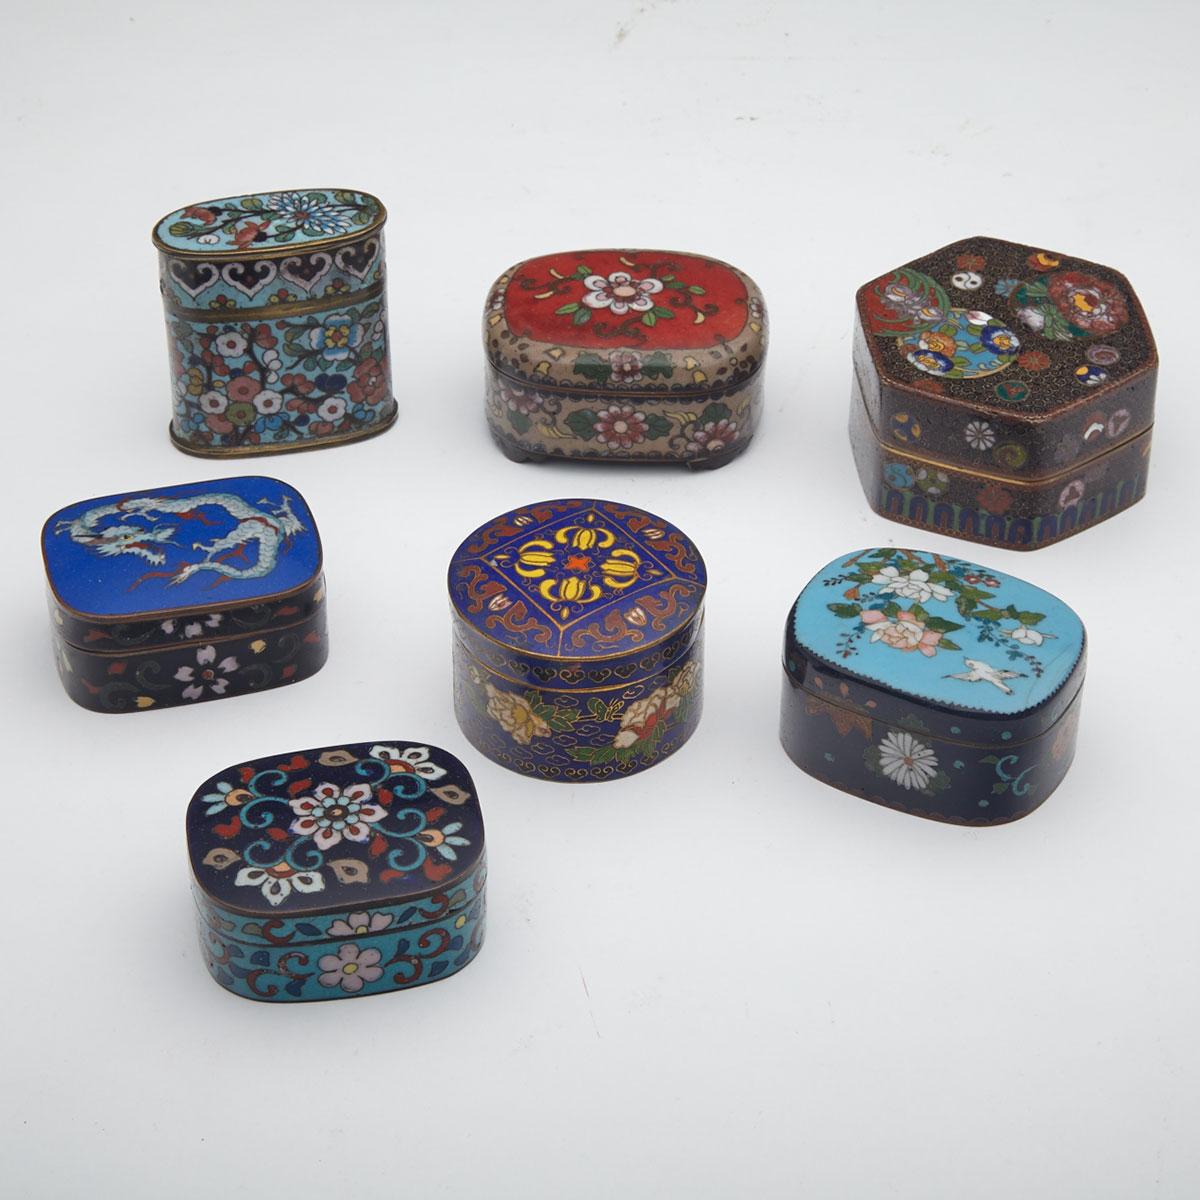 Seven Small Cloisonné Enamel Boxes, China and Japan, 19th/20th Century